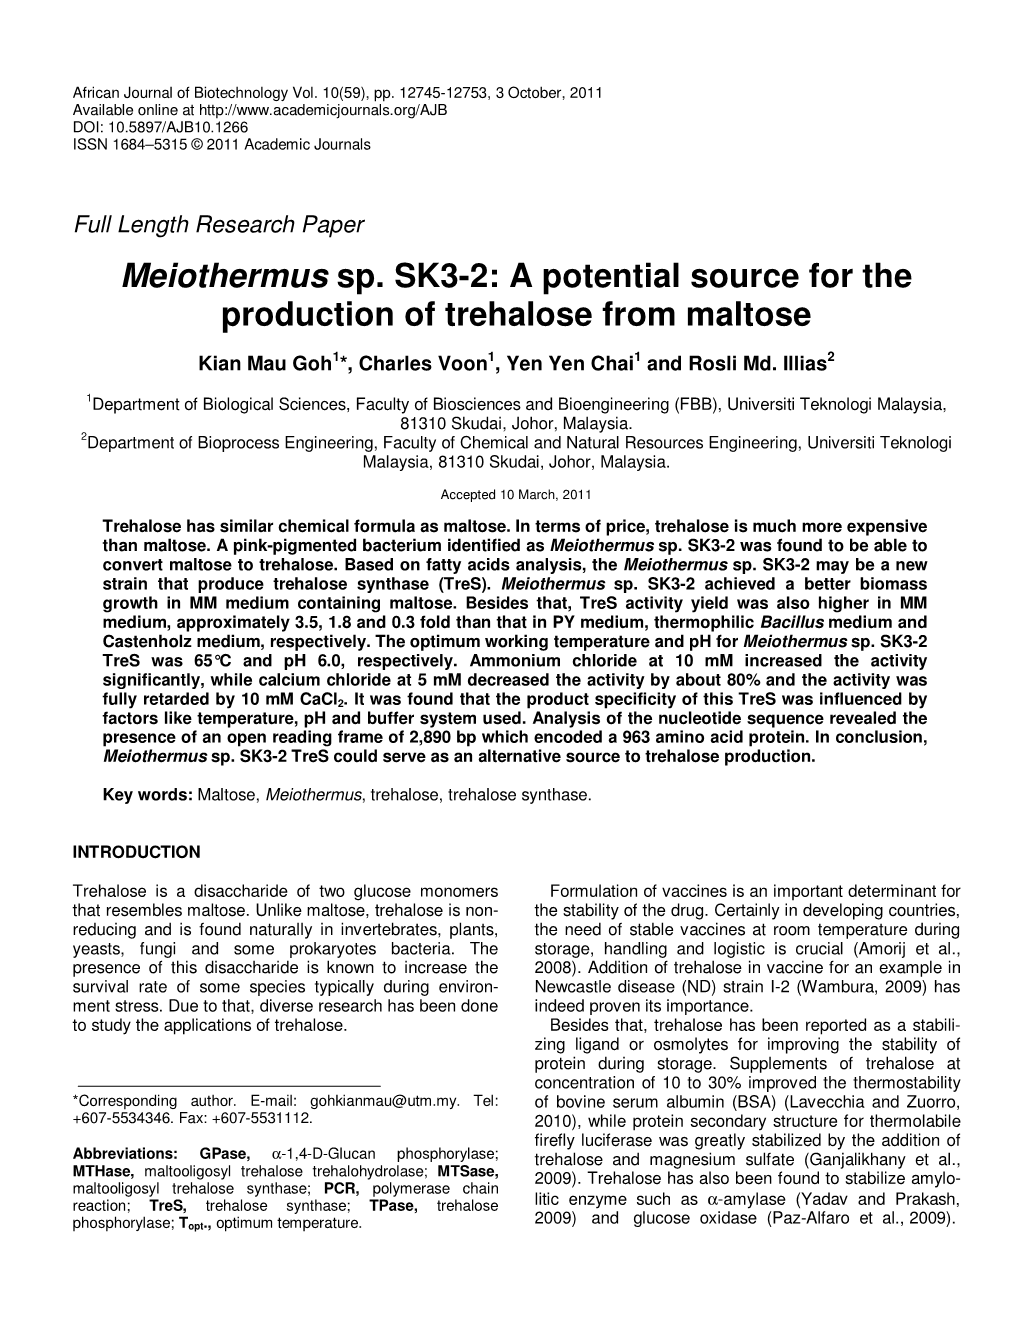 Meiothermus Sp. SK3-2: a Potential Source for the Production of Trehalose from Maltose